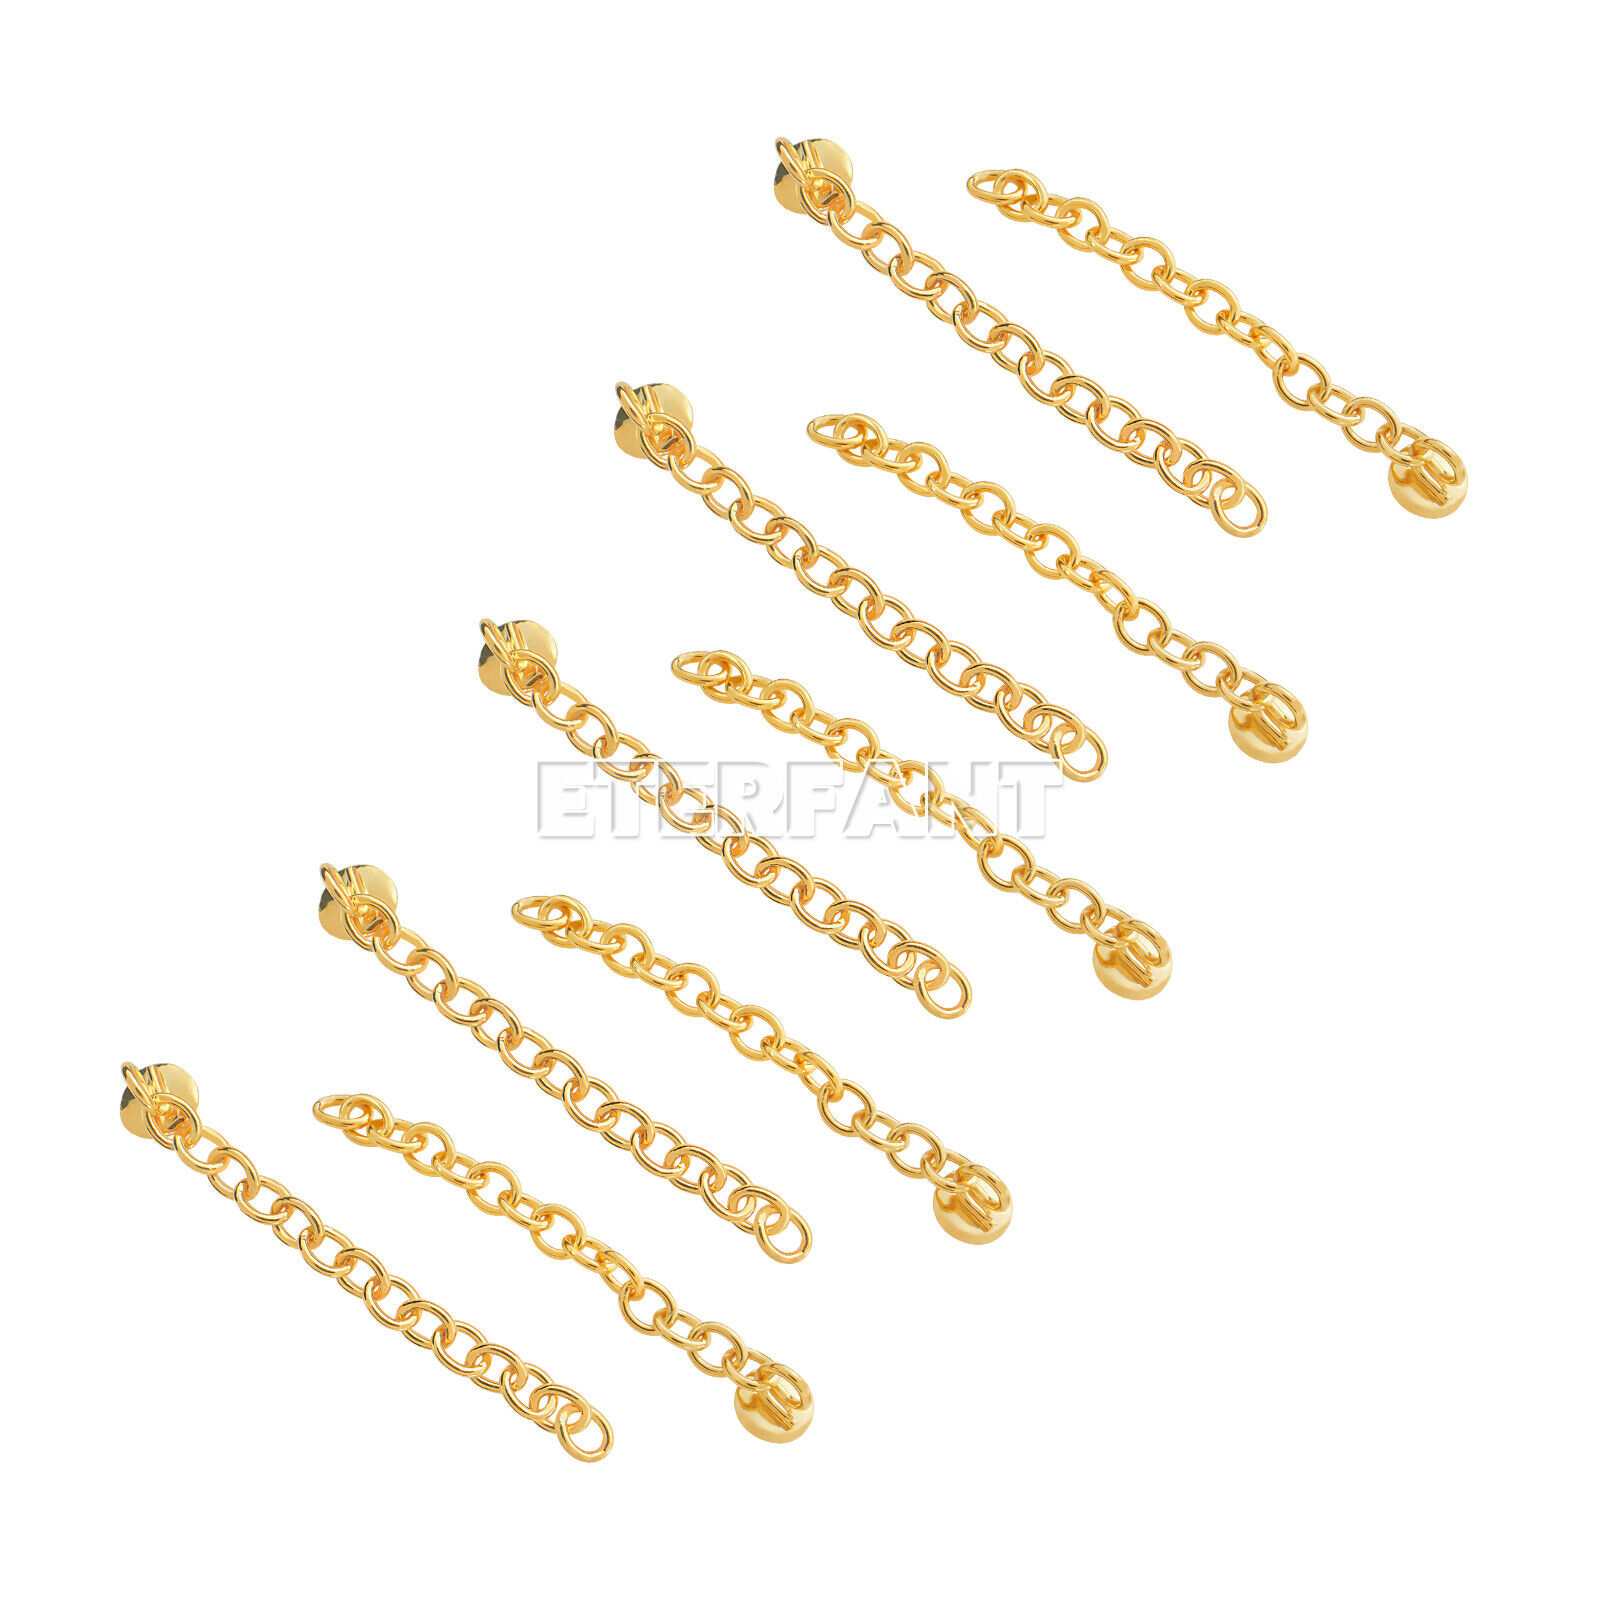 10PCs ETERFANT Dental Orthodontic Lingual Button Chains Round Base Plated Gold